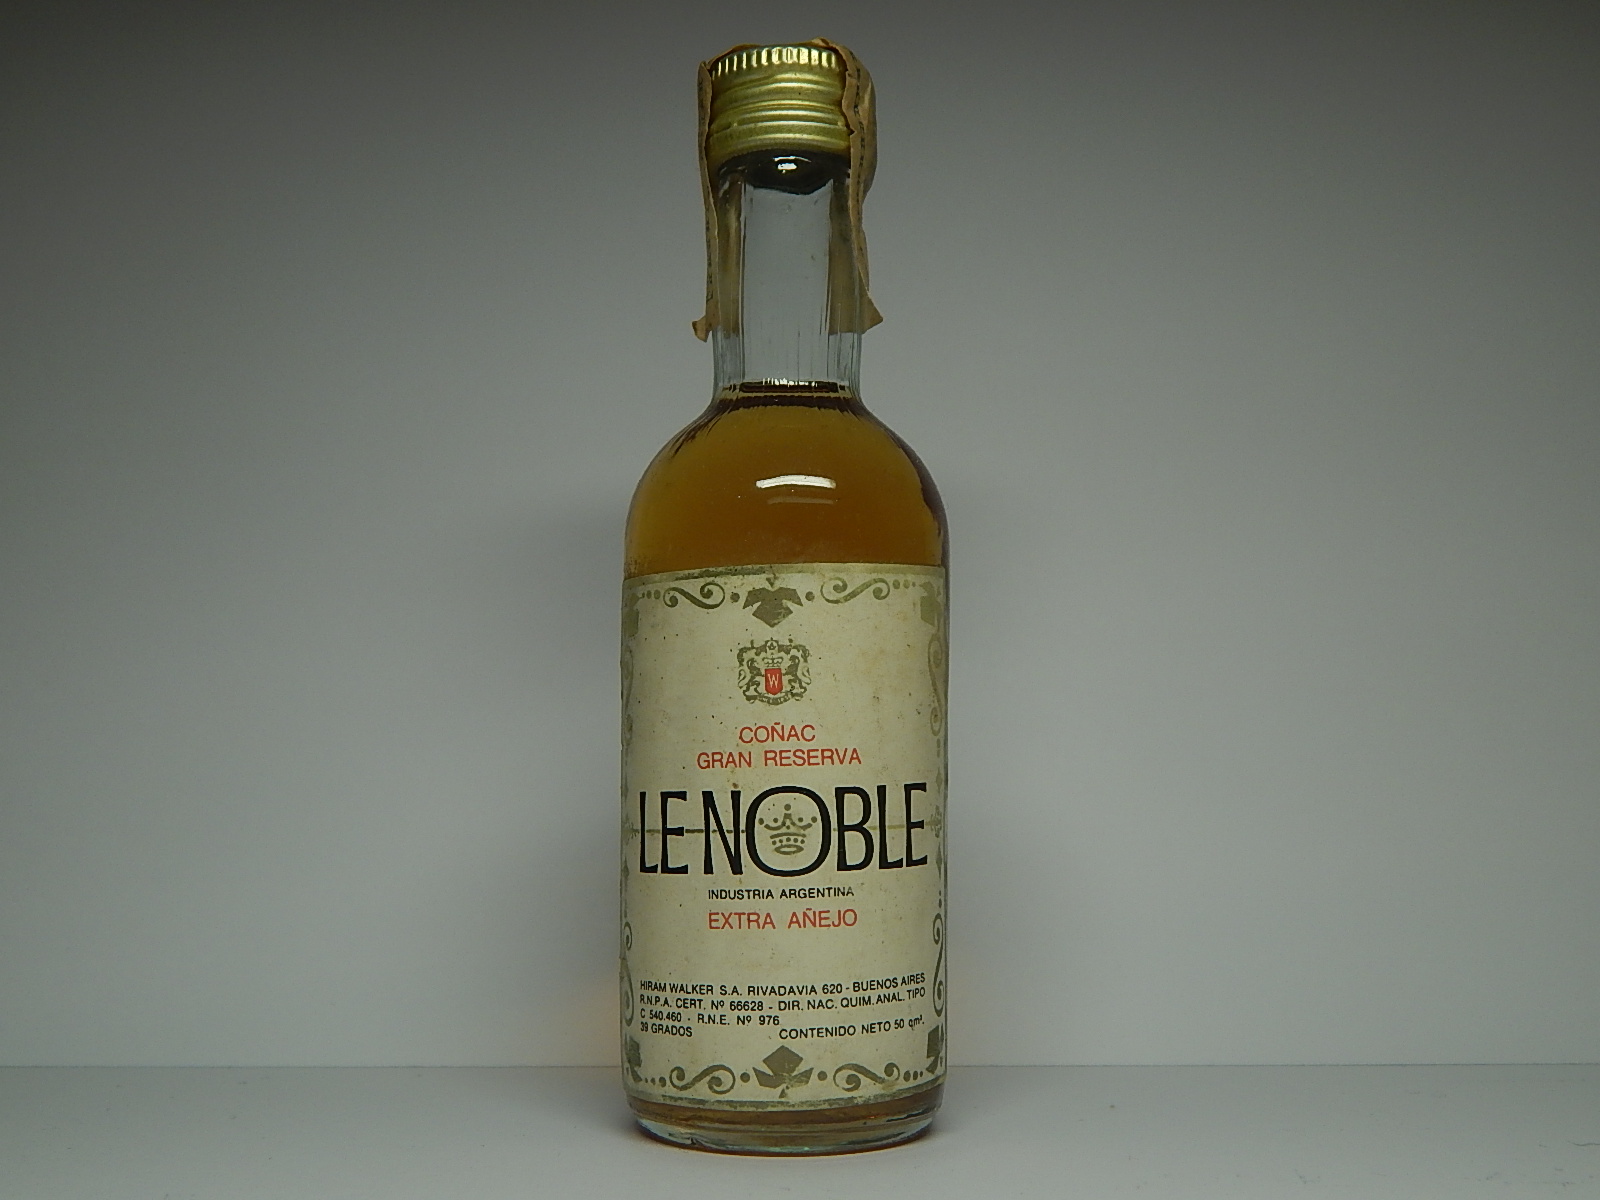 LE NOBLE Extra Anejo Coňac "Argentina"